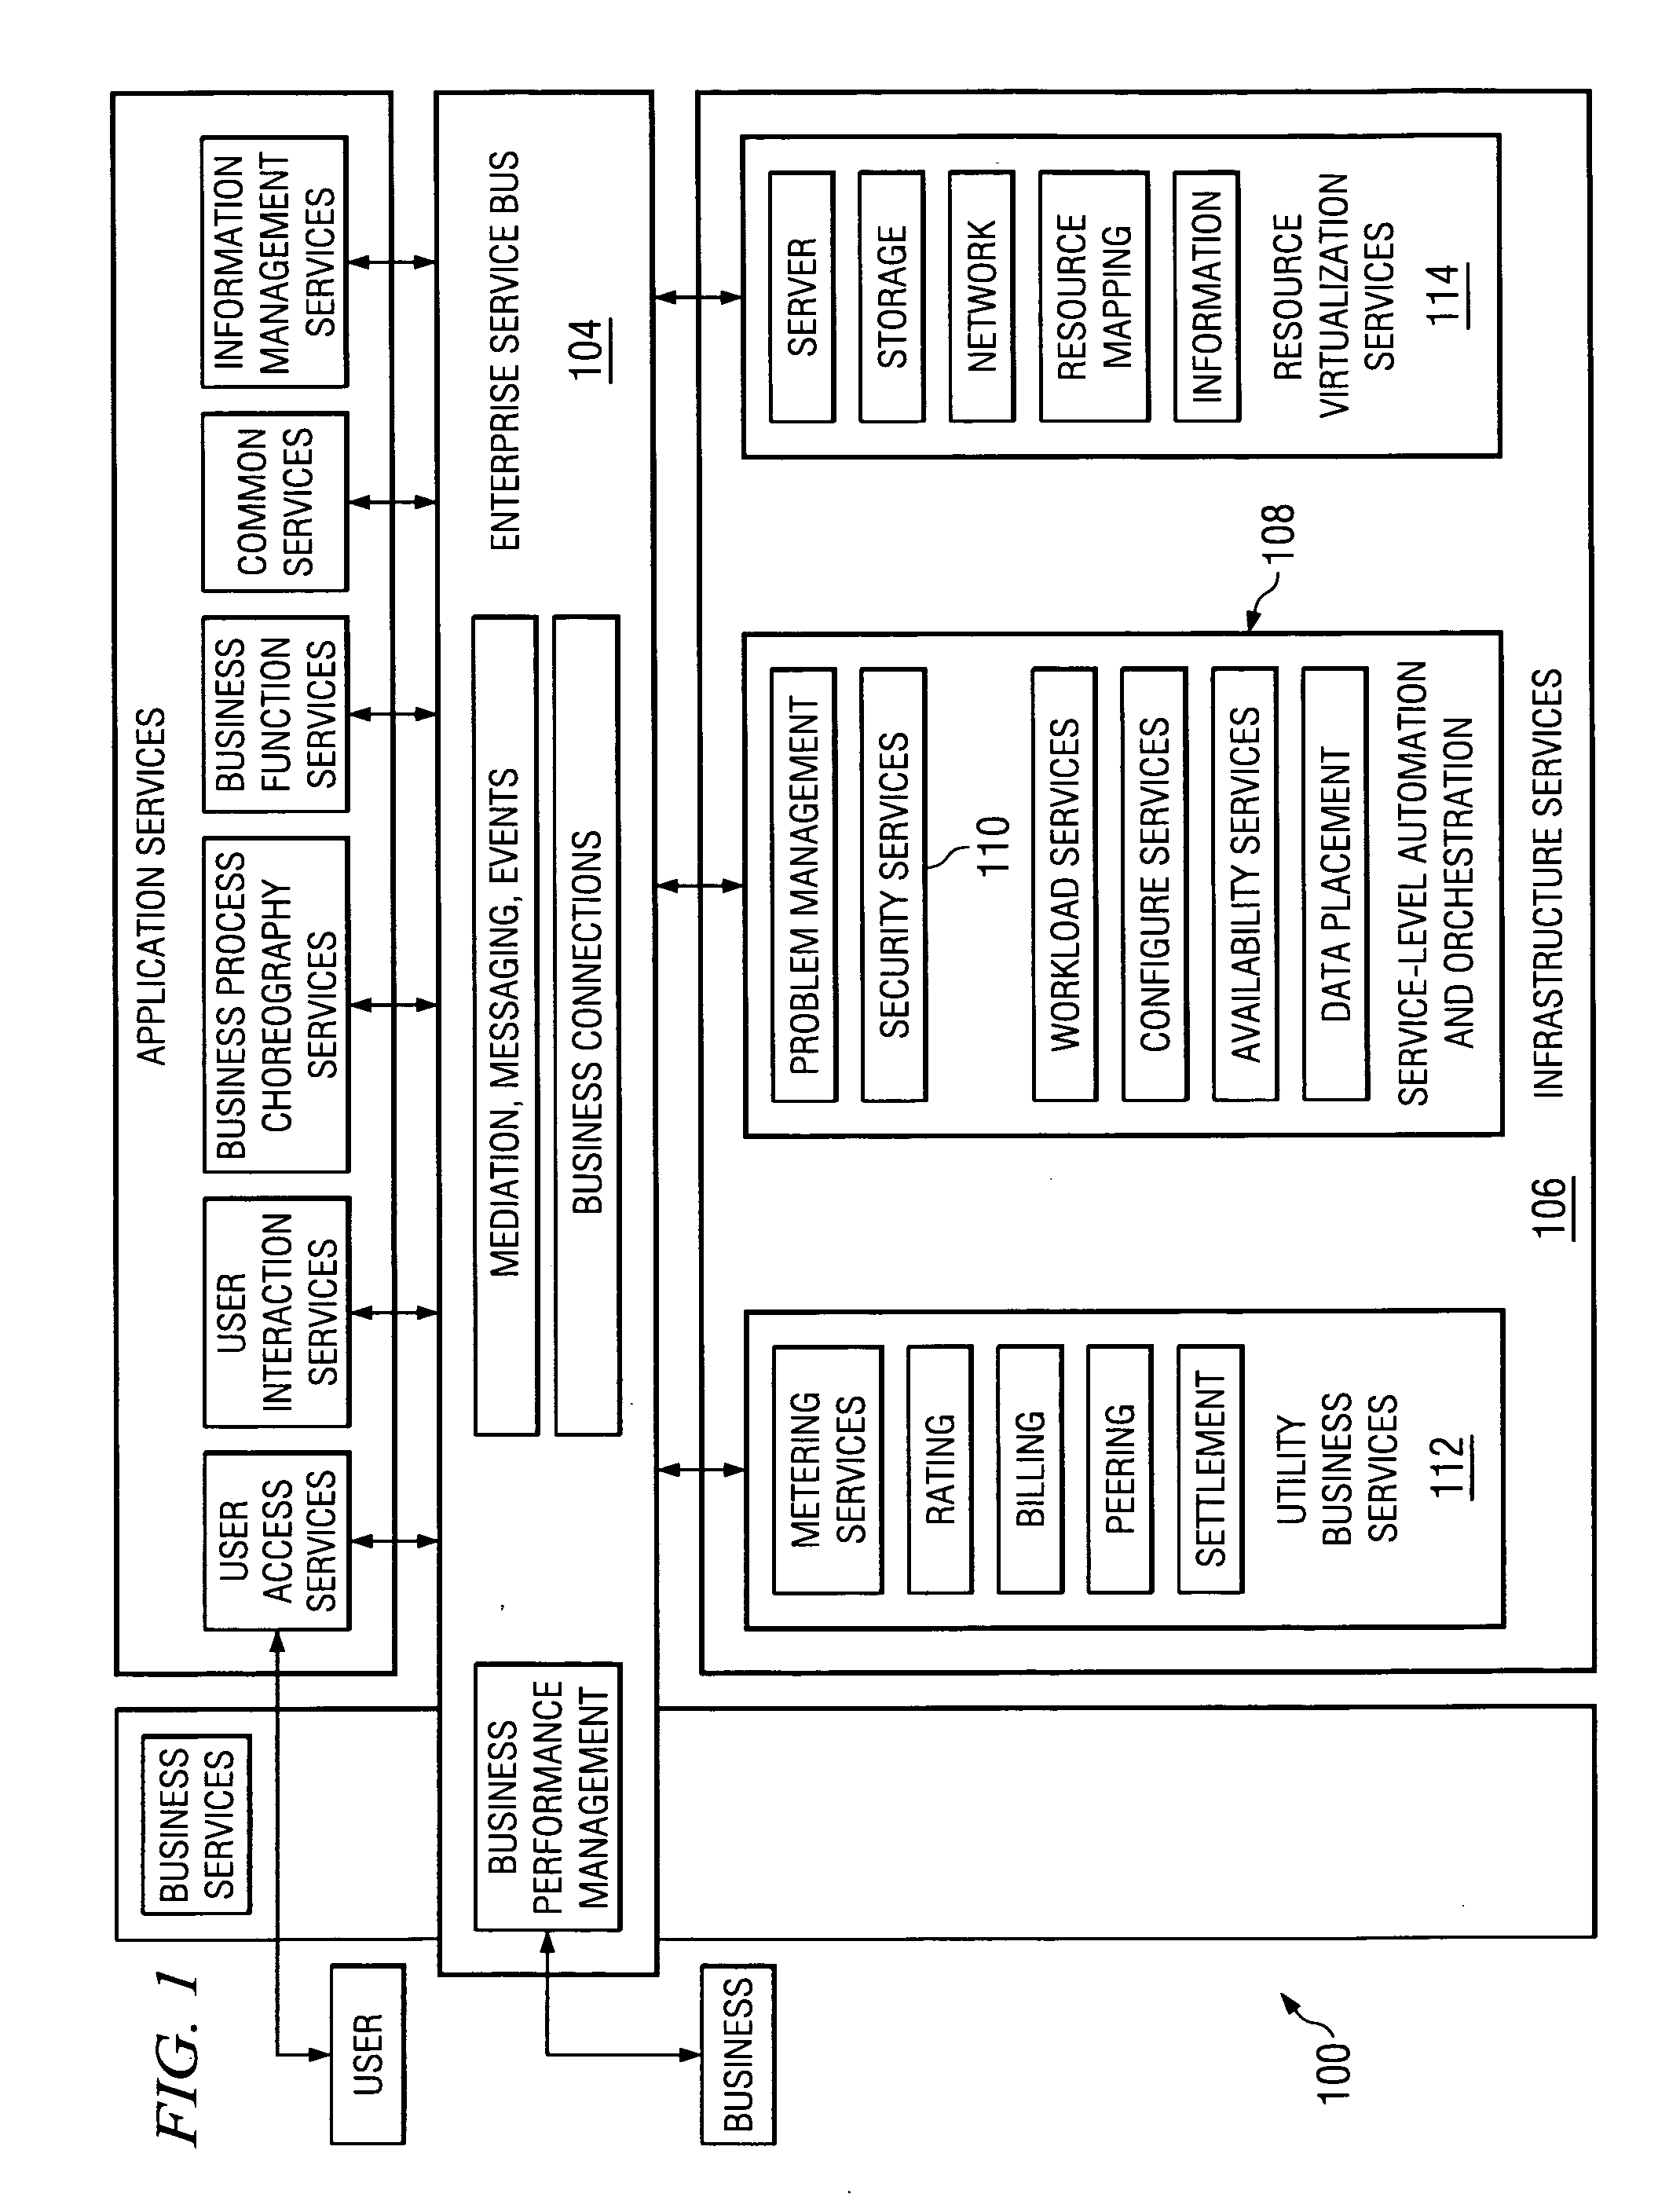 System and method for controlling on-demand security